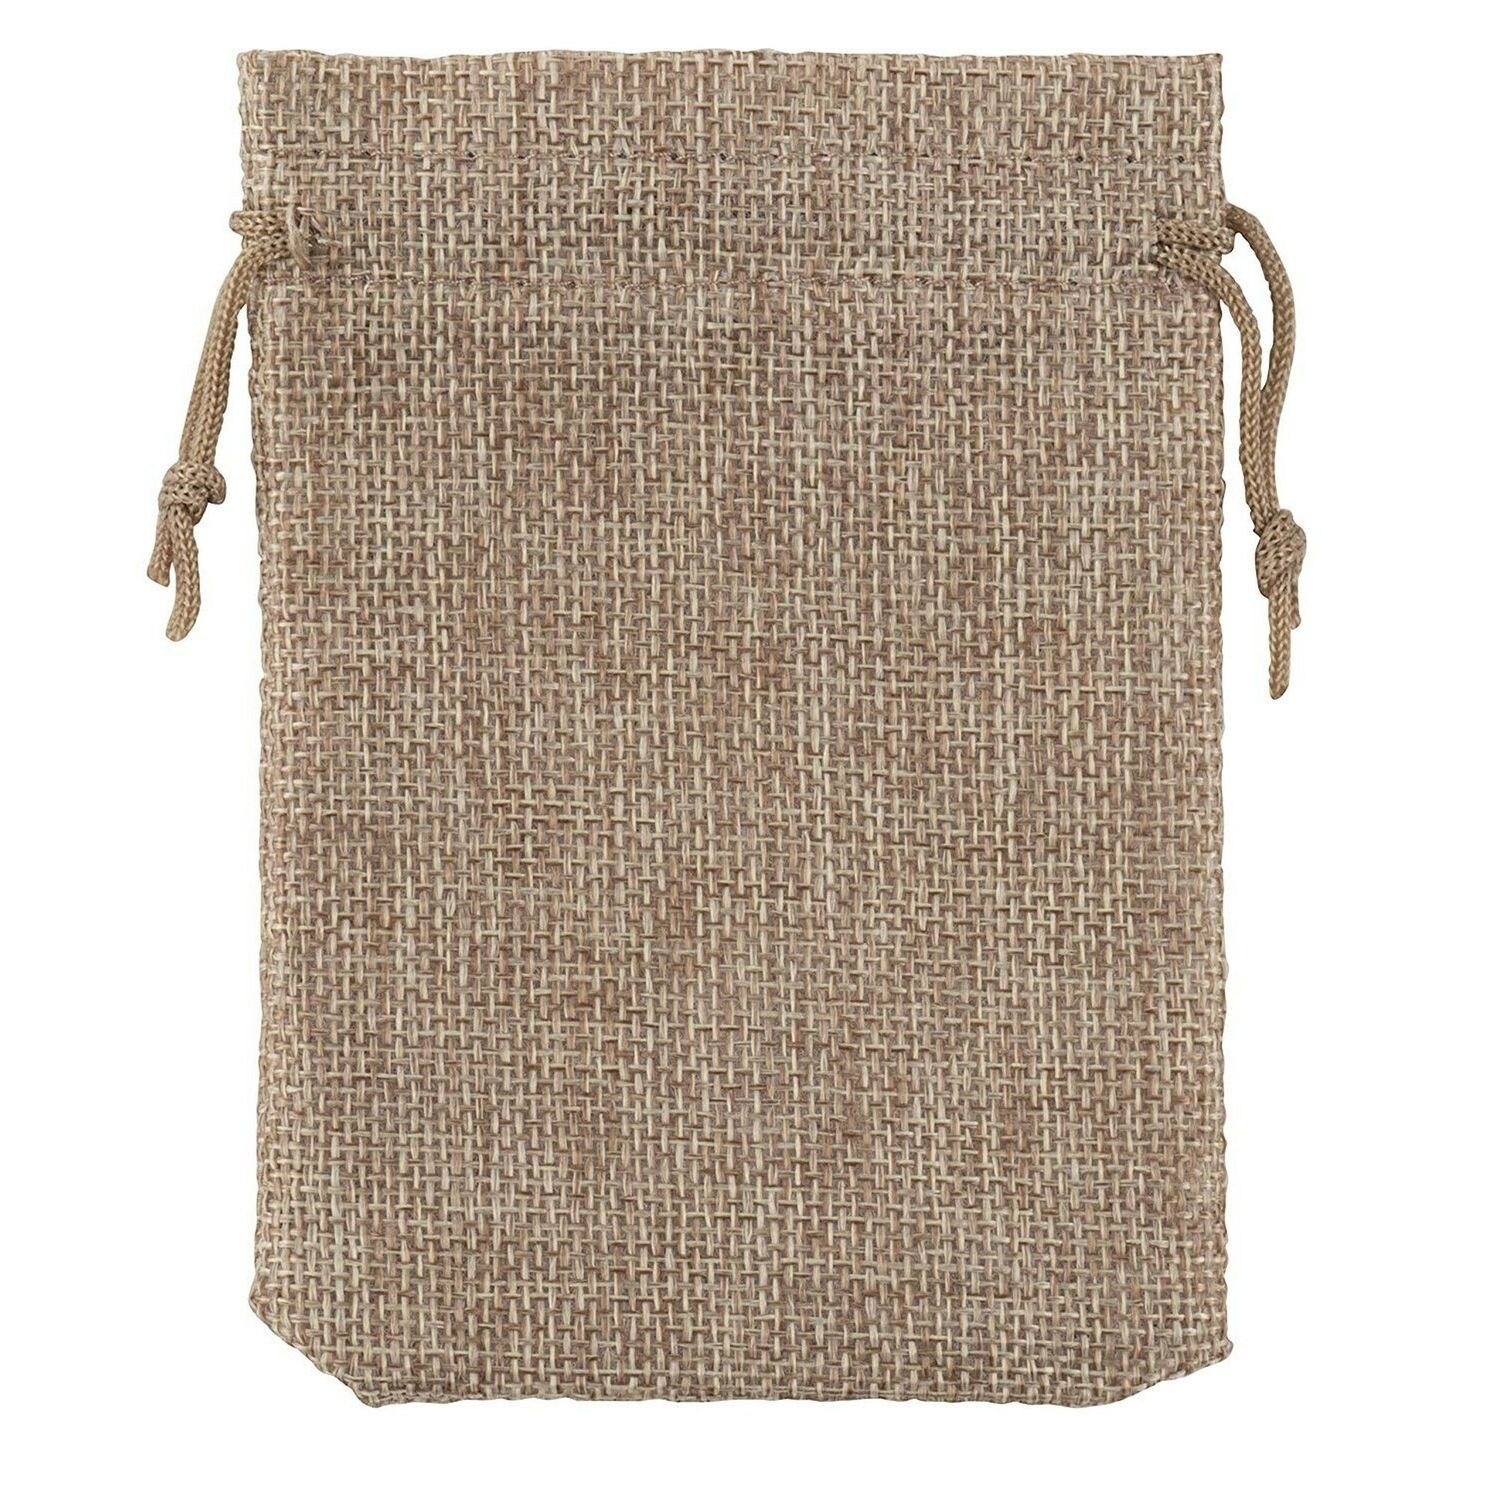 https://ak1.ostkcdn.com/images/products/29792941/100-Pack-Drawstring-Gift-Bags-Burlap-Jewelry-Pouch-Gift-Bags-for-DIY-Art-Craft-4cf87ae6-1c5a-4b65-8711-d3dfe828c10d.jpg